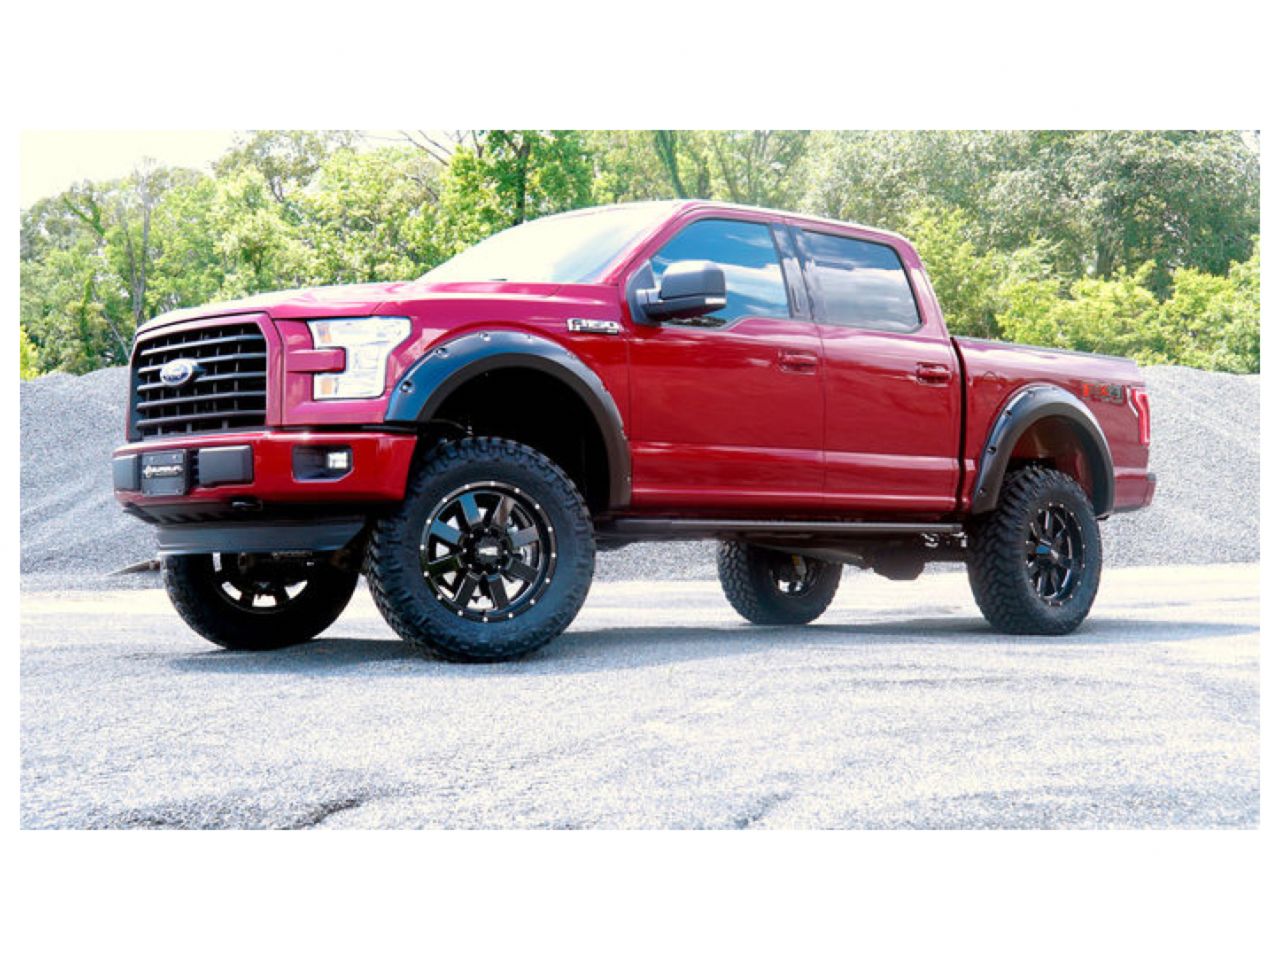 Superlift 6in Ford Lift Kit | F-150 4WD